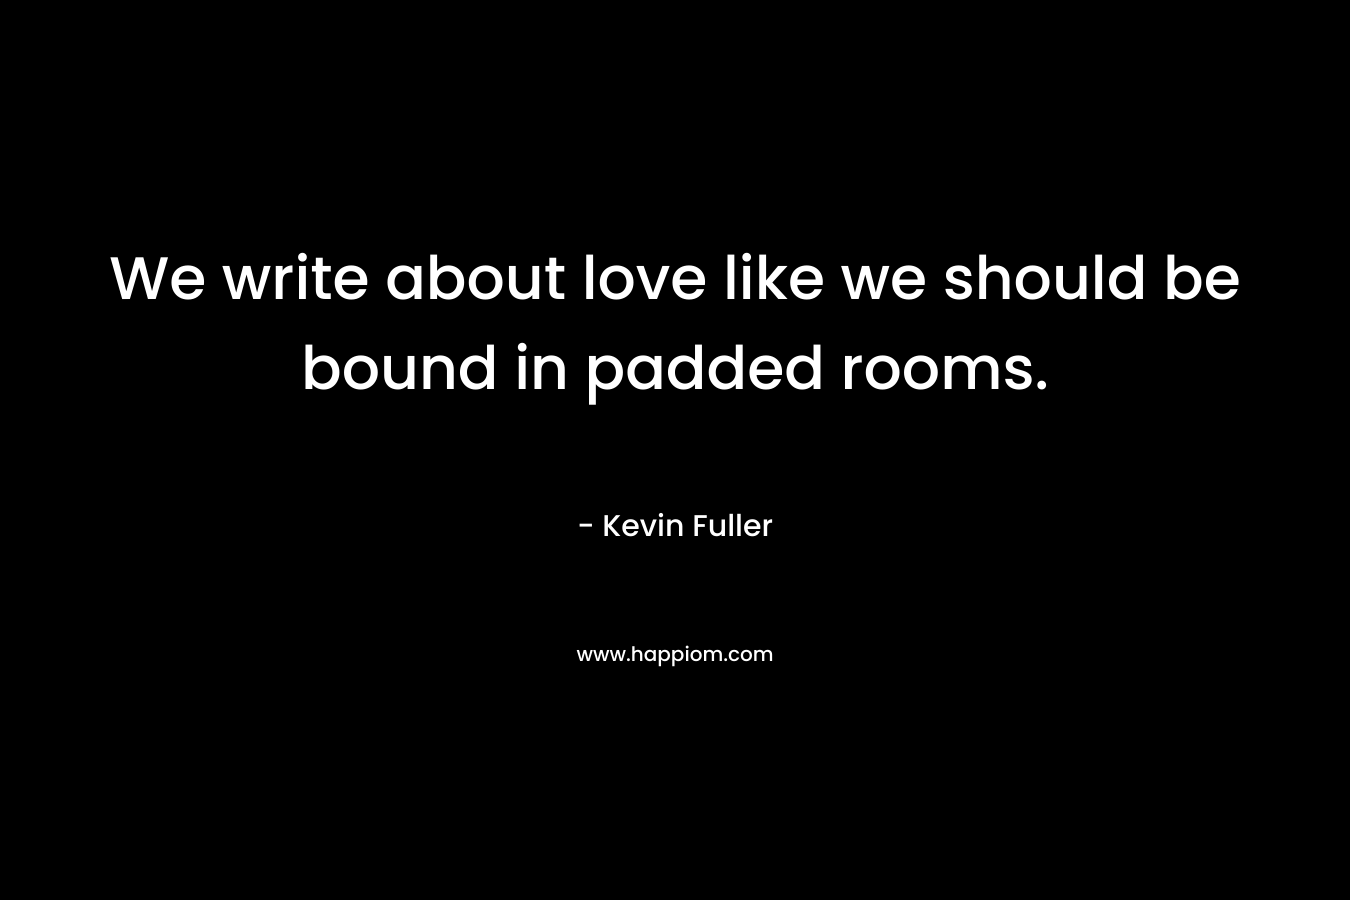 We write about love like we should be bound in padded rooms. – Kevin Fuller